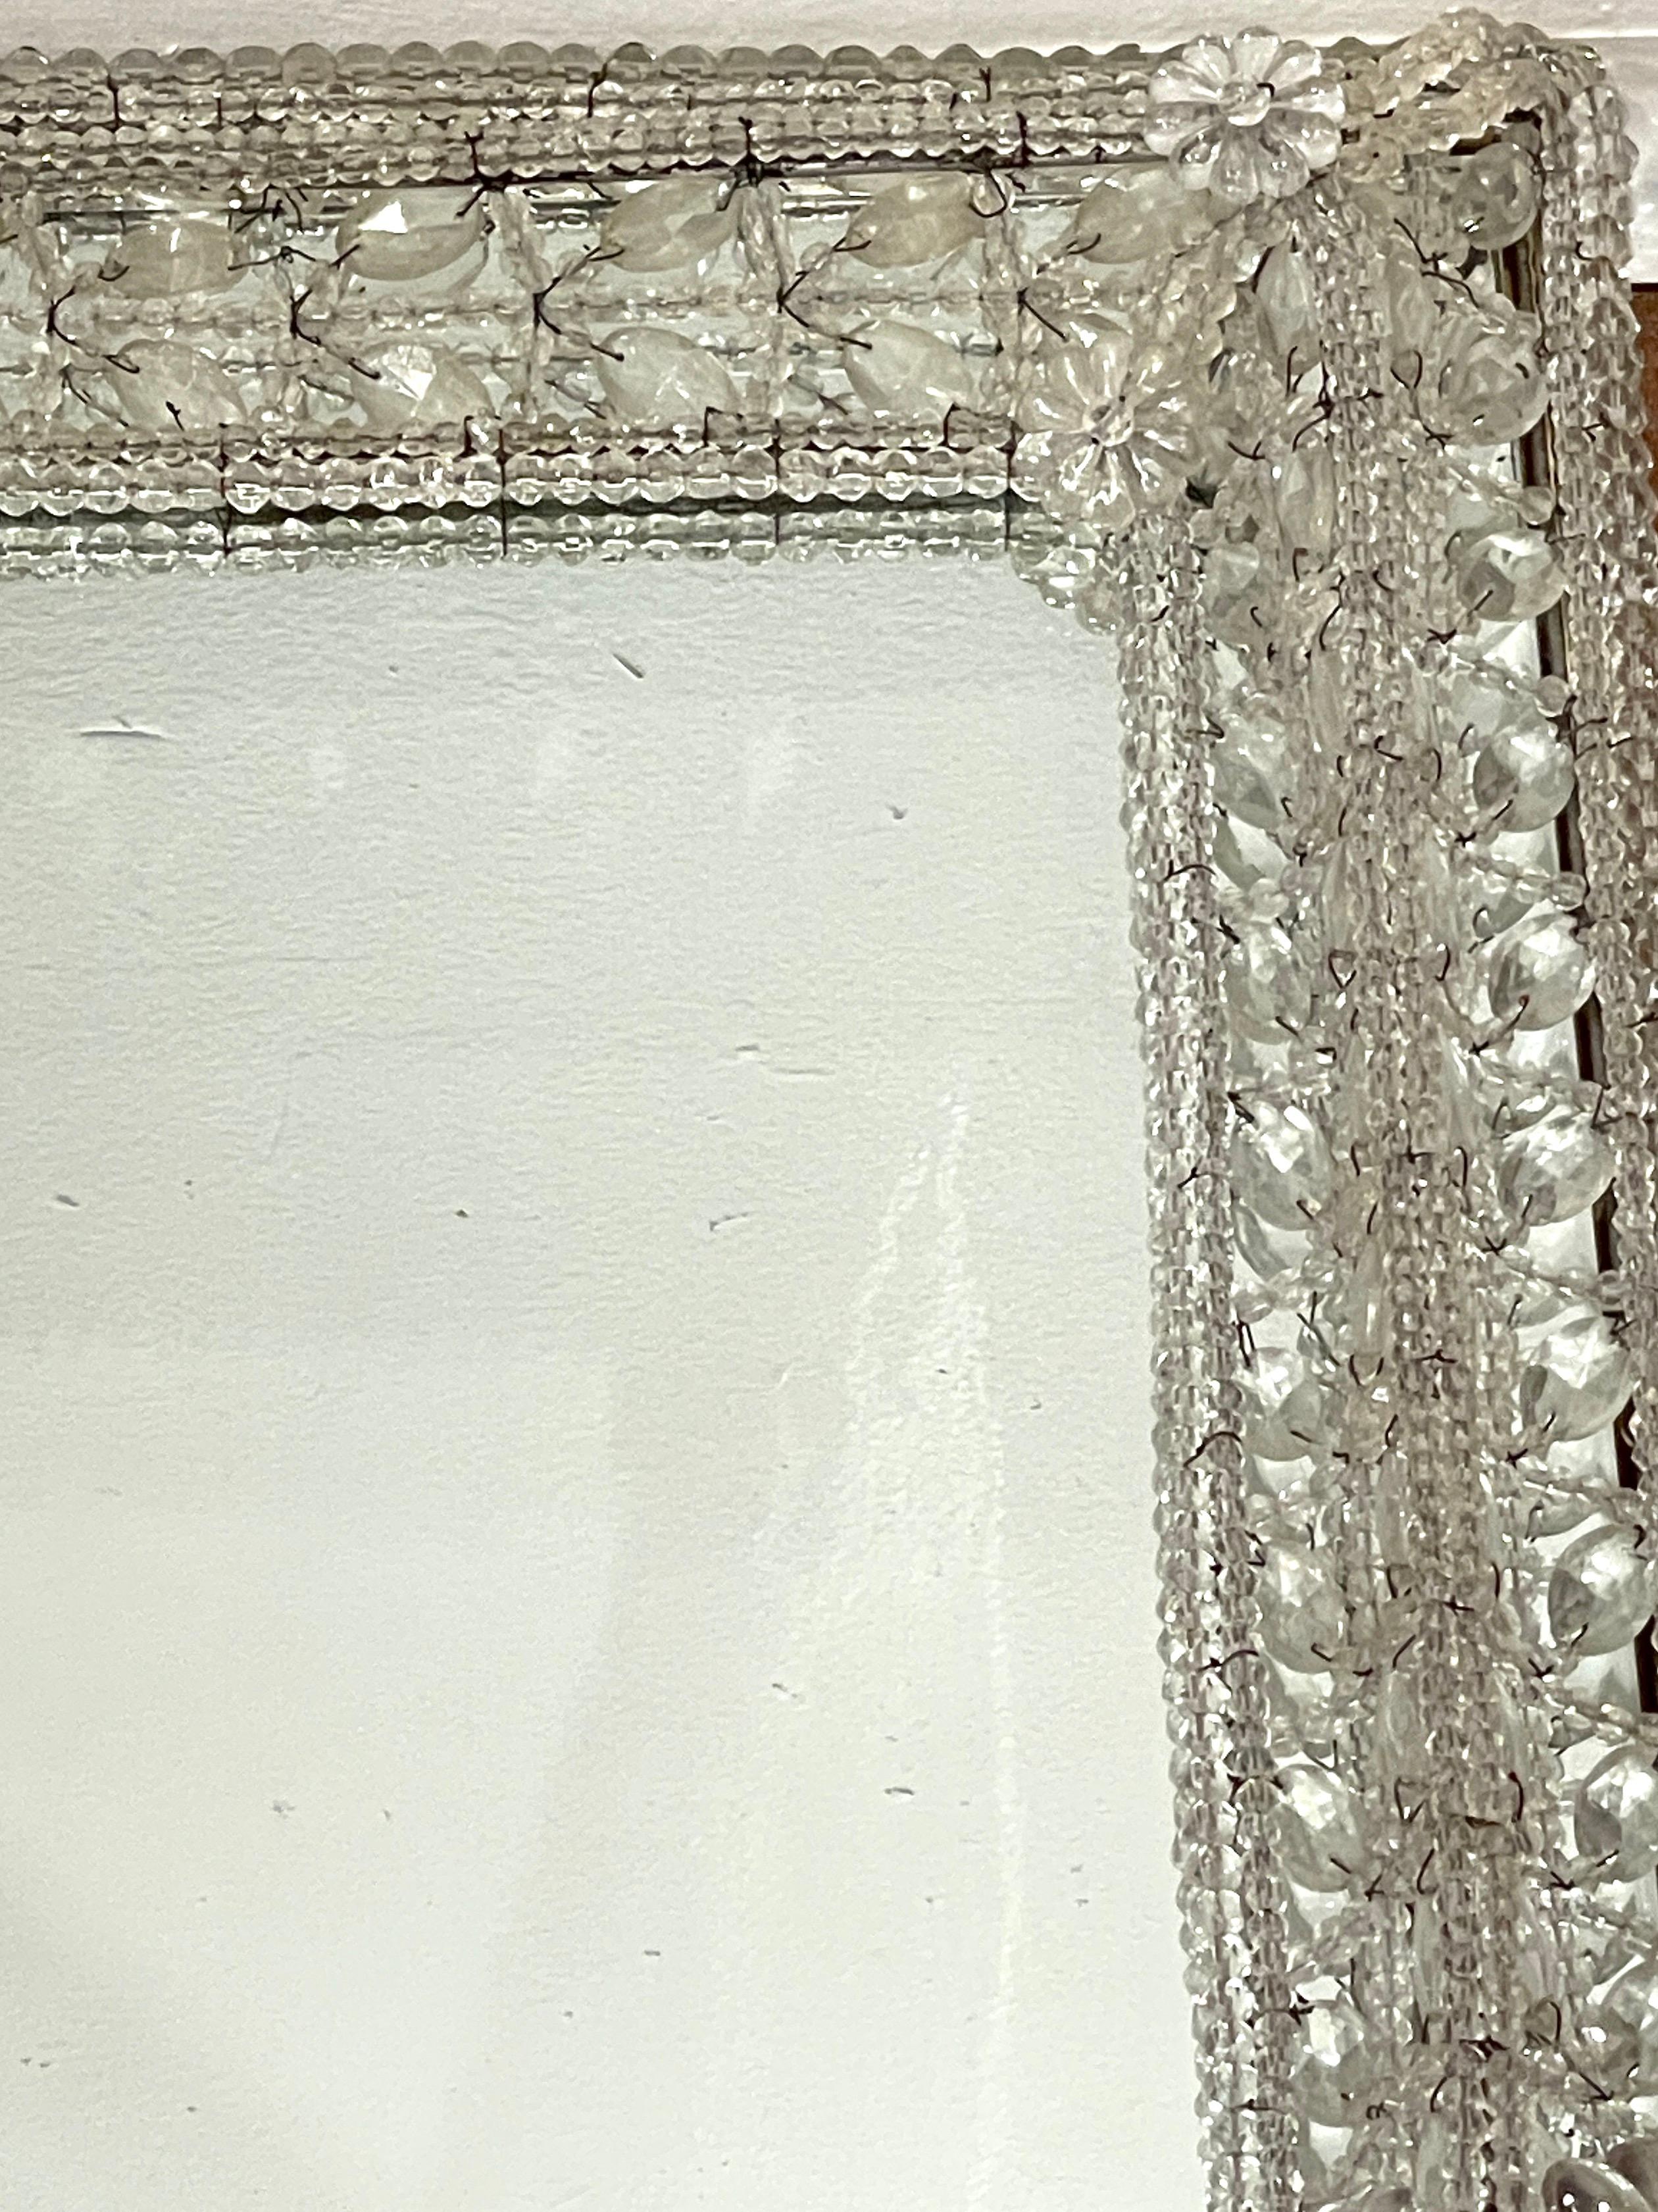 Exquisite Venetian Beaded Crystal Mirror, Of rectangular form with continuous intricate raised Venetian crystal surround, with inset 17.5-Inch wide x 25-Inch high mirror. 

